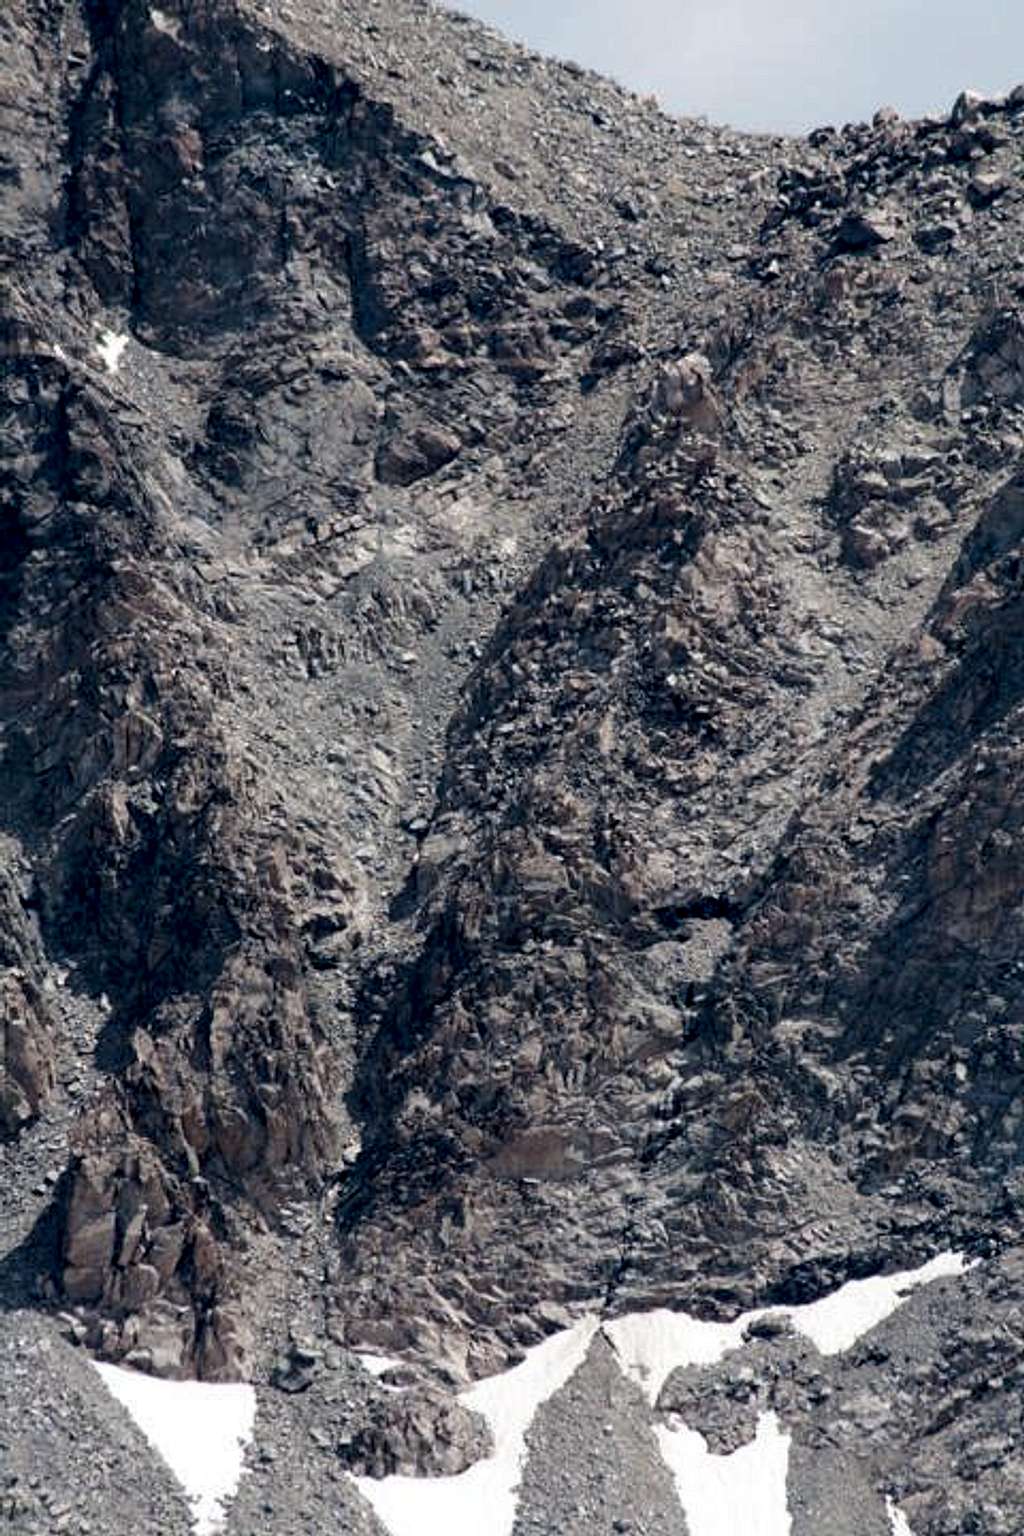 The Southwest Couloir as seen from Mount Whitecap